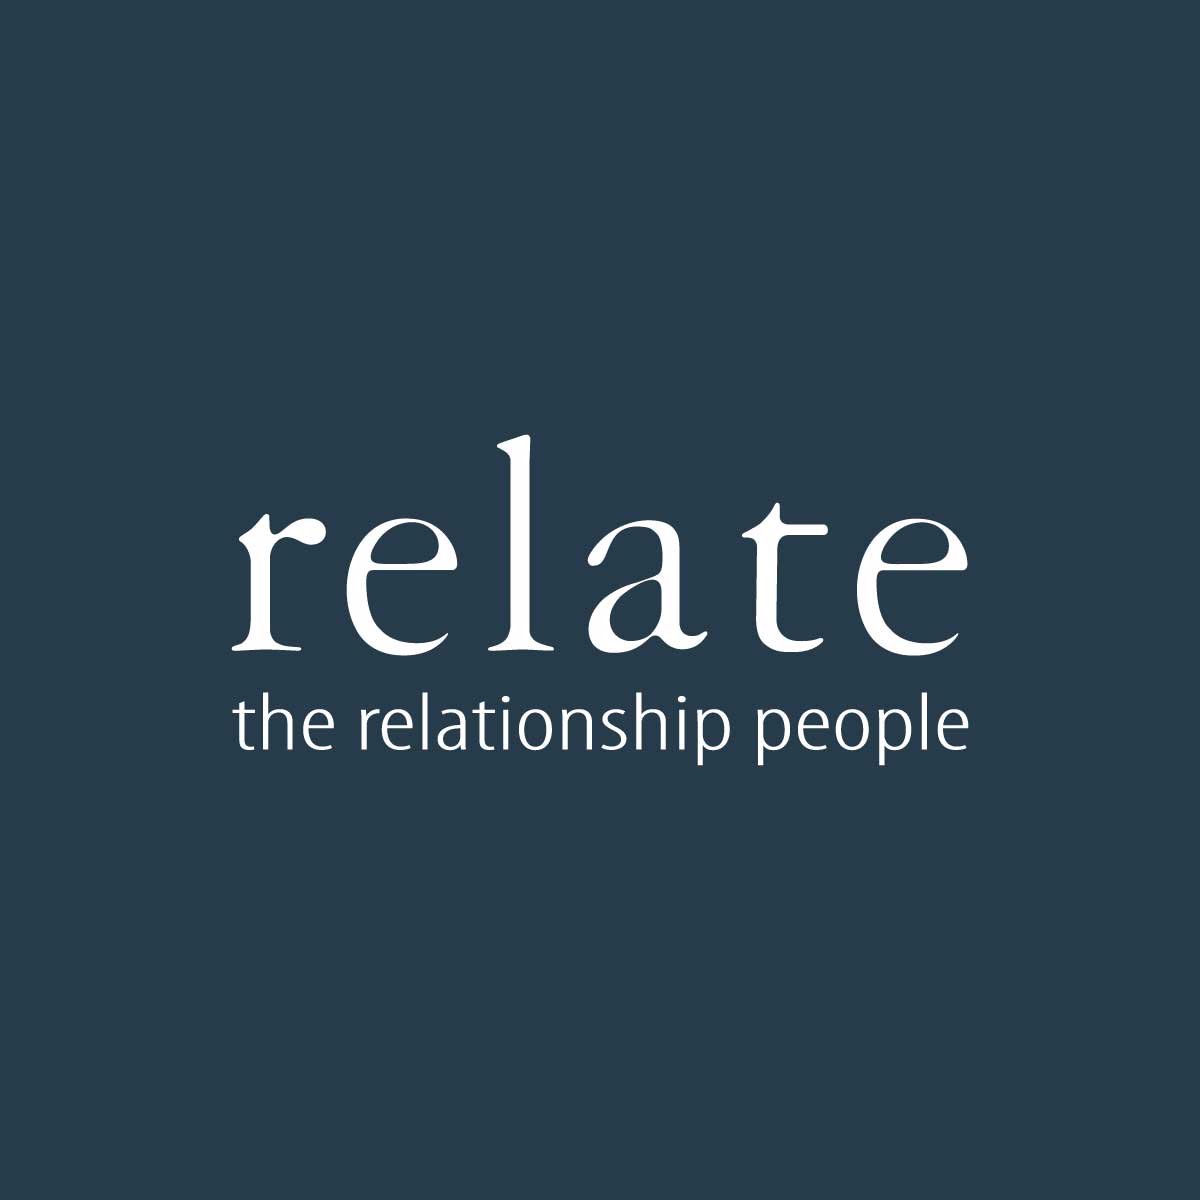 Relate the relationship people

Relate uses the income from our shops to provide relationship support for people across the North East.